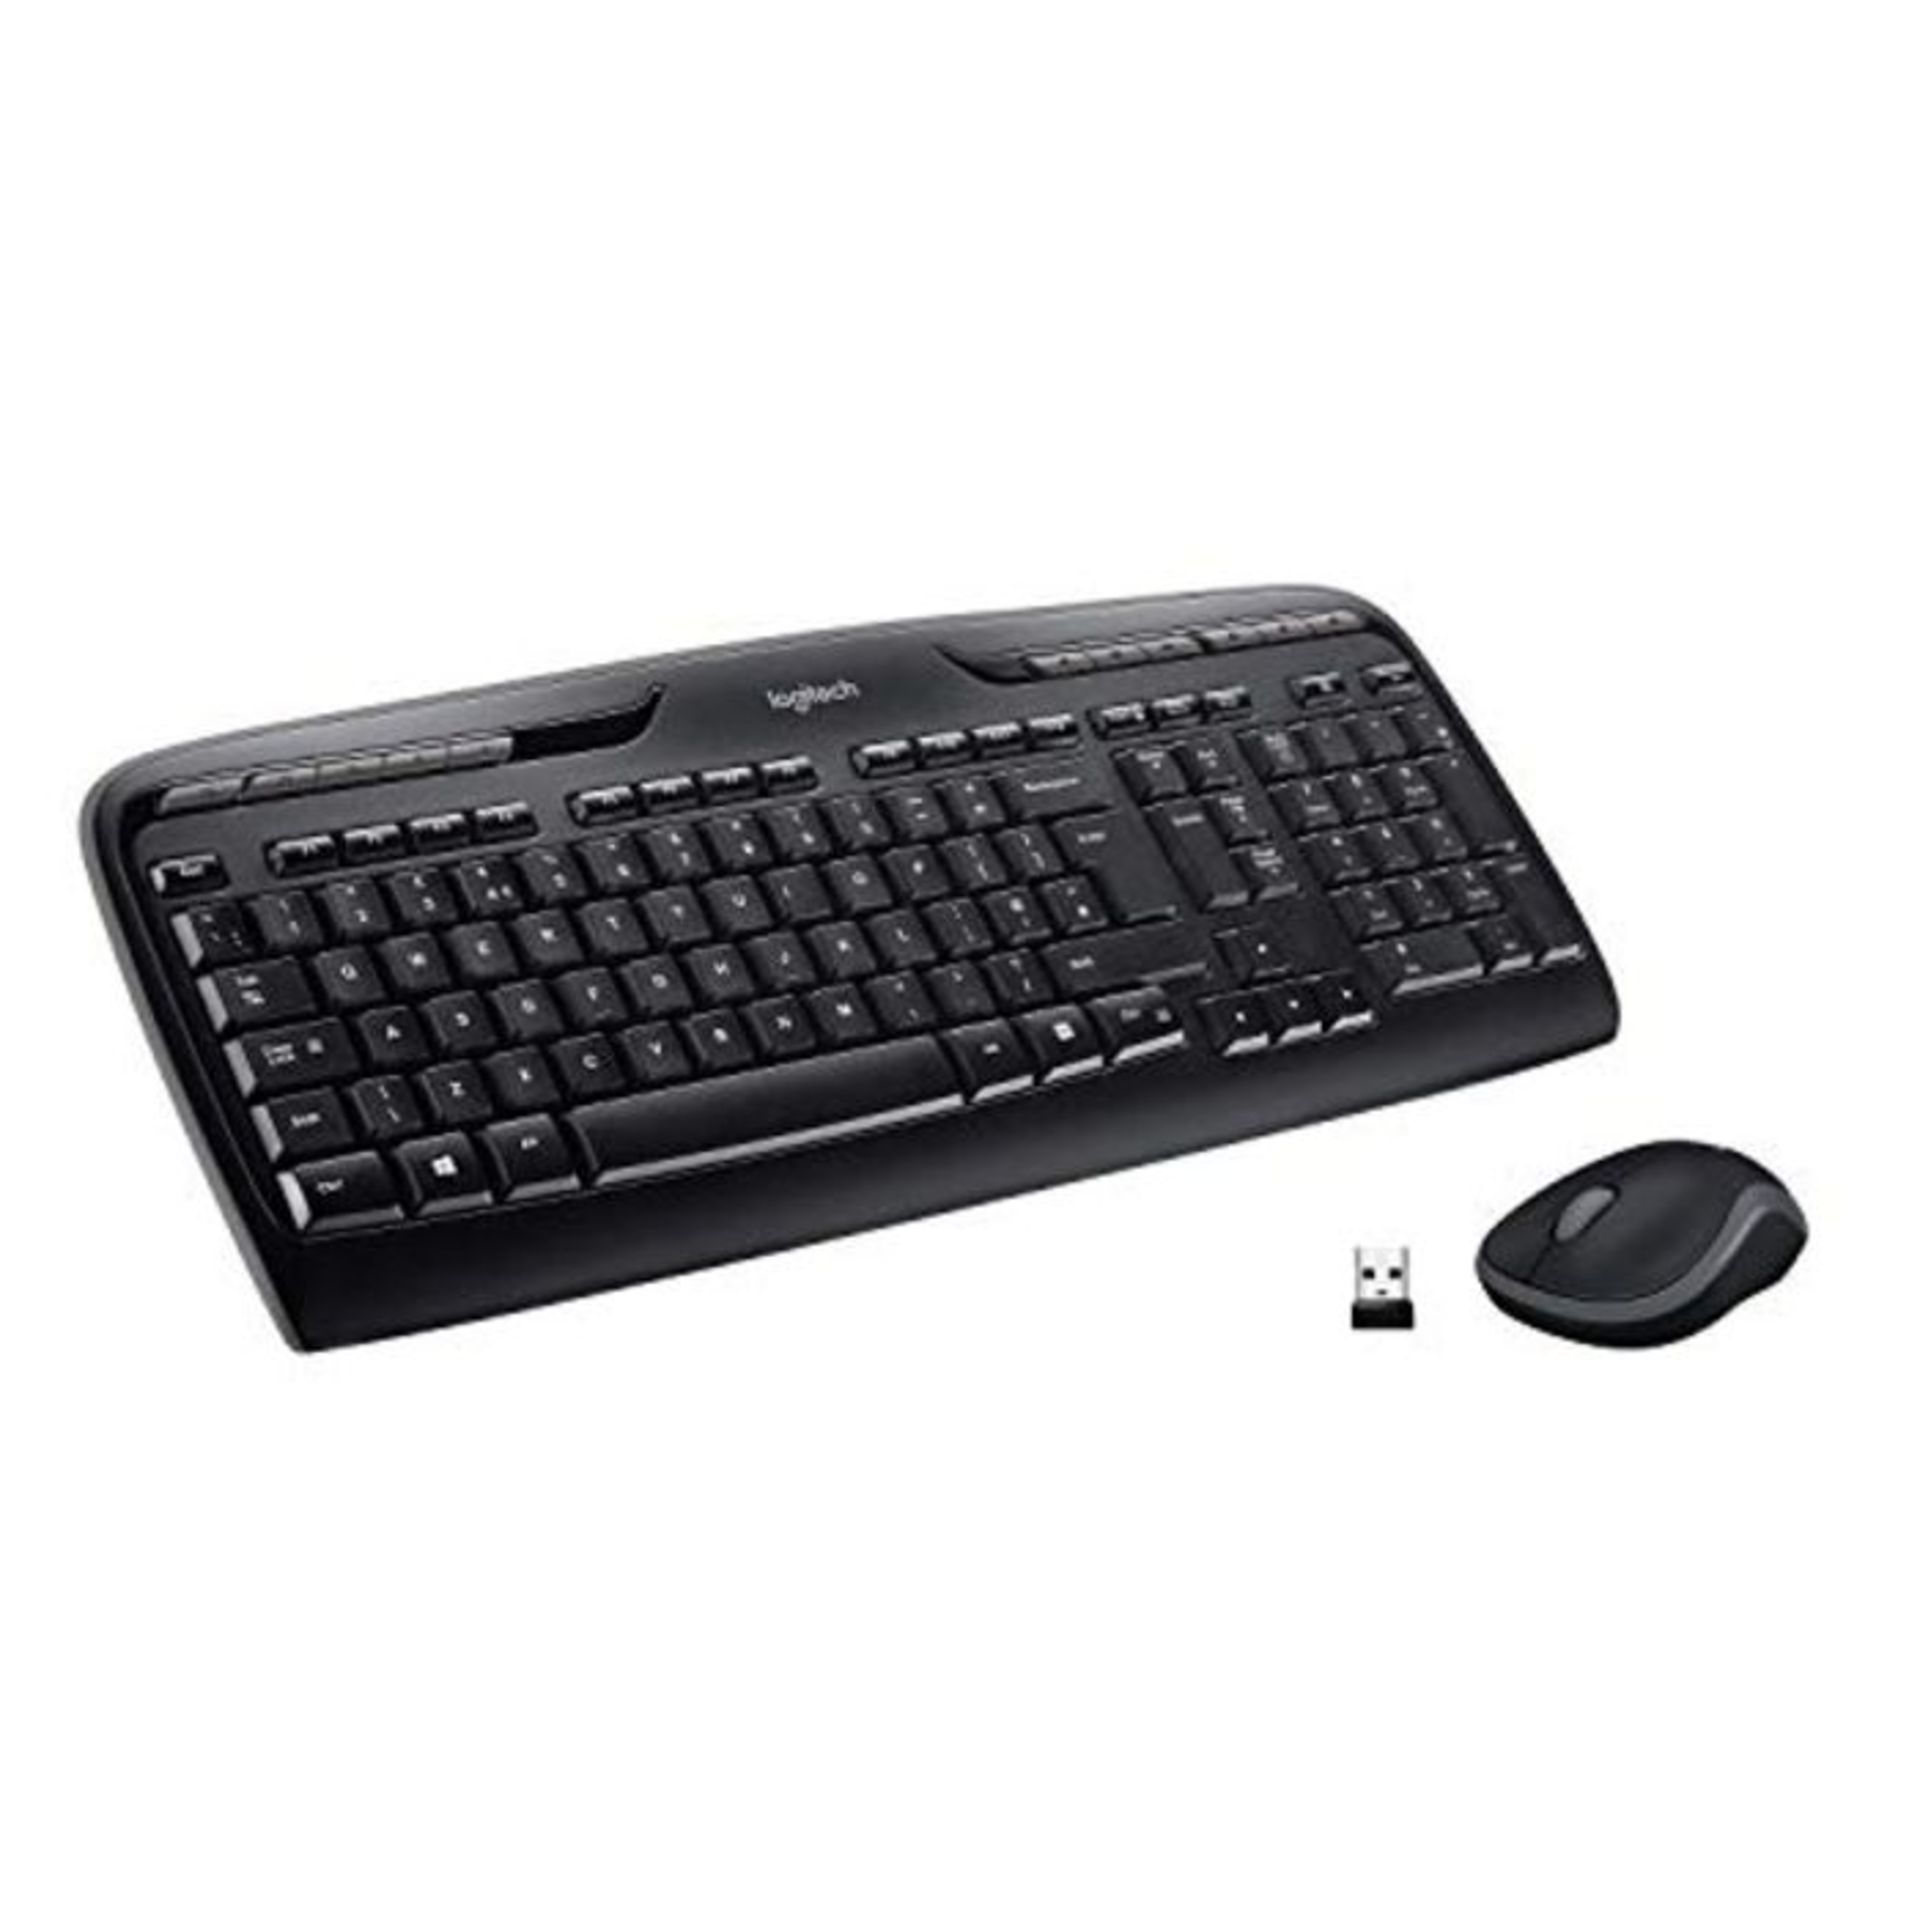 Logitech MK330 Wireless Keyboard and Mouse Combo for Windows, 2.4 GHz Wireless with US